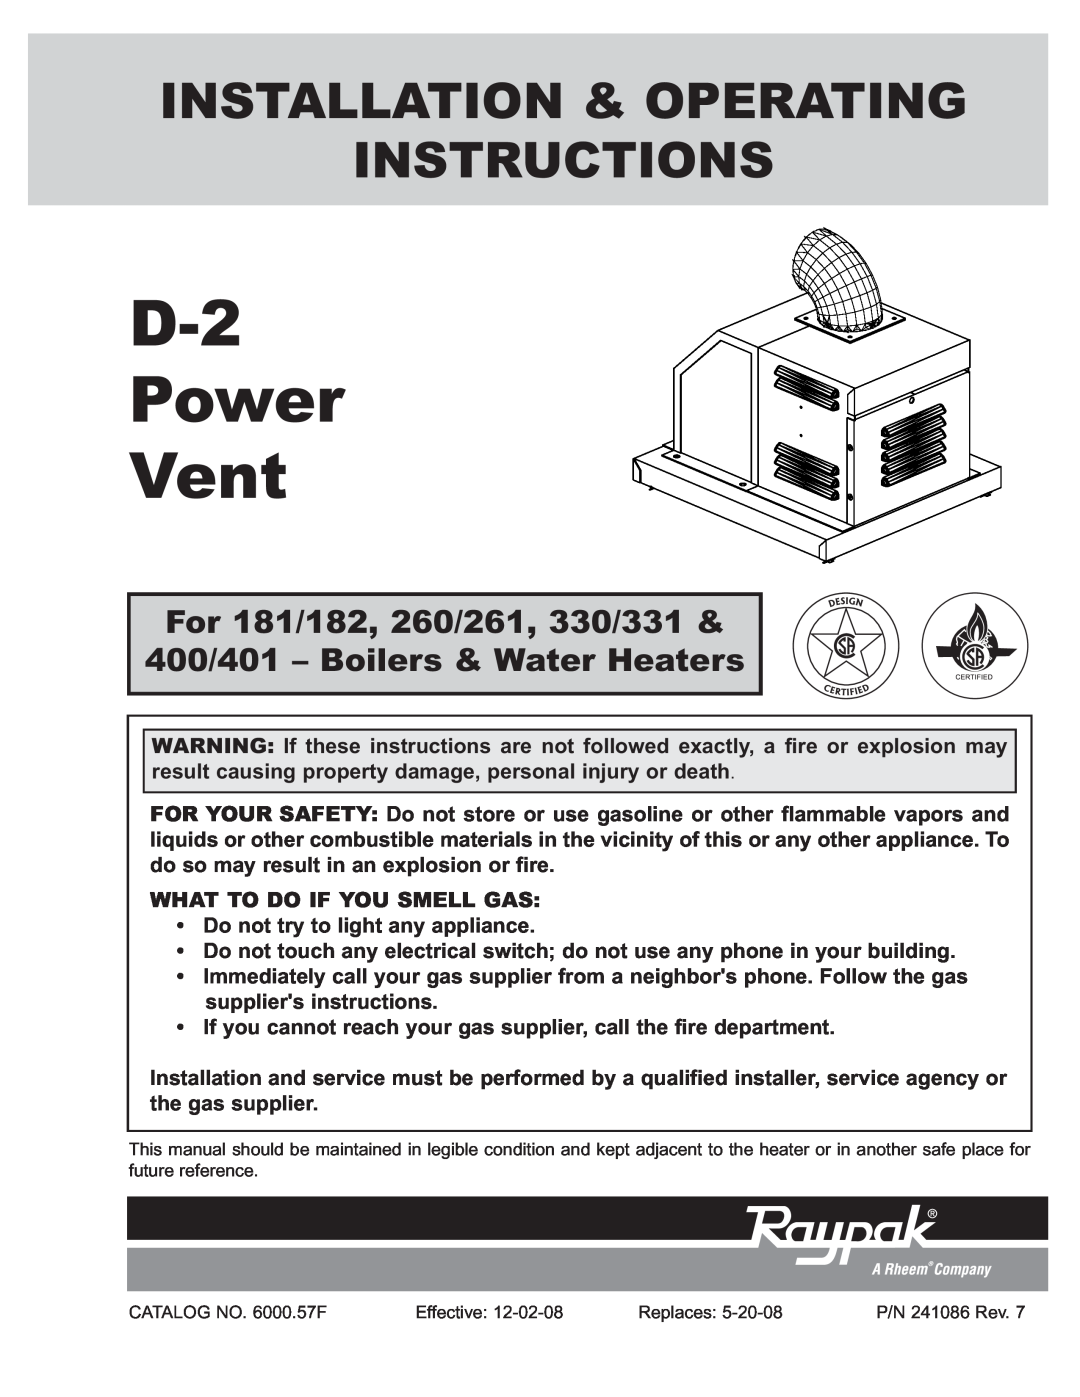 Raypak D2 manual For 181/182, 260/261, 330/331, 400/401 - Boilers & Water Heaters, D-2 Power Vent 